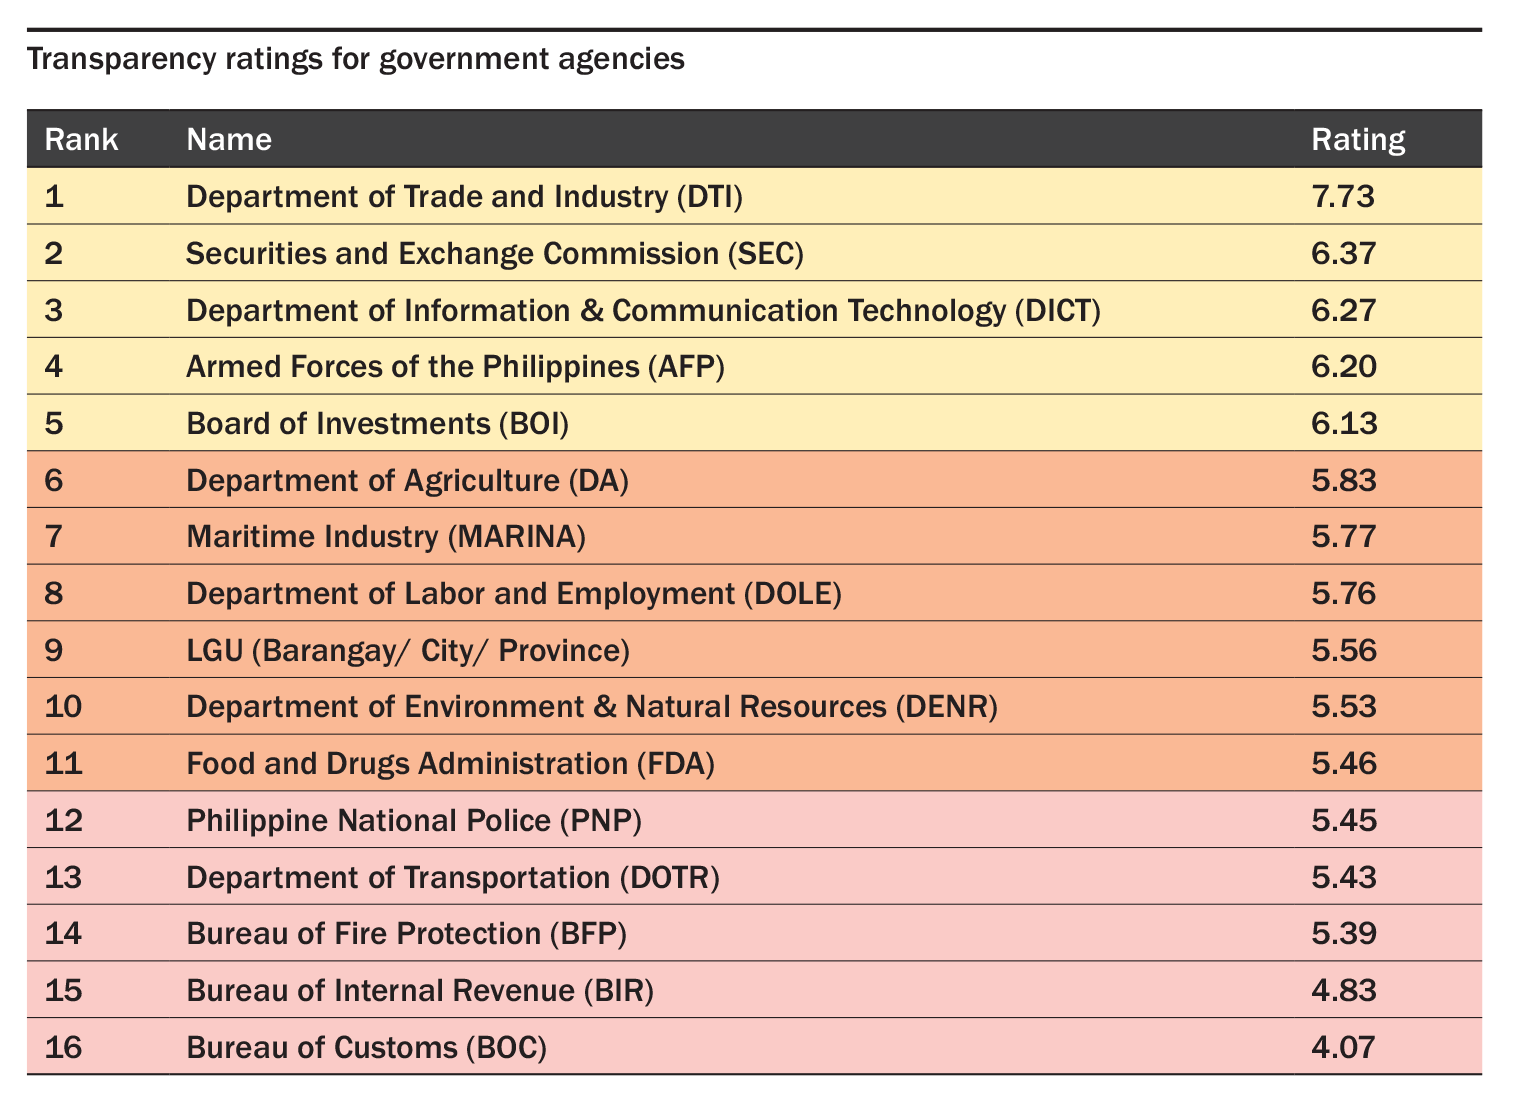 Transparency ratings of government agencies